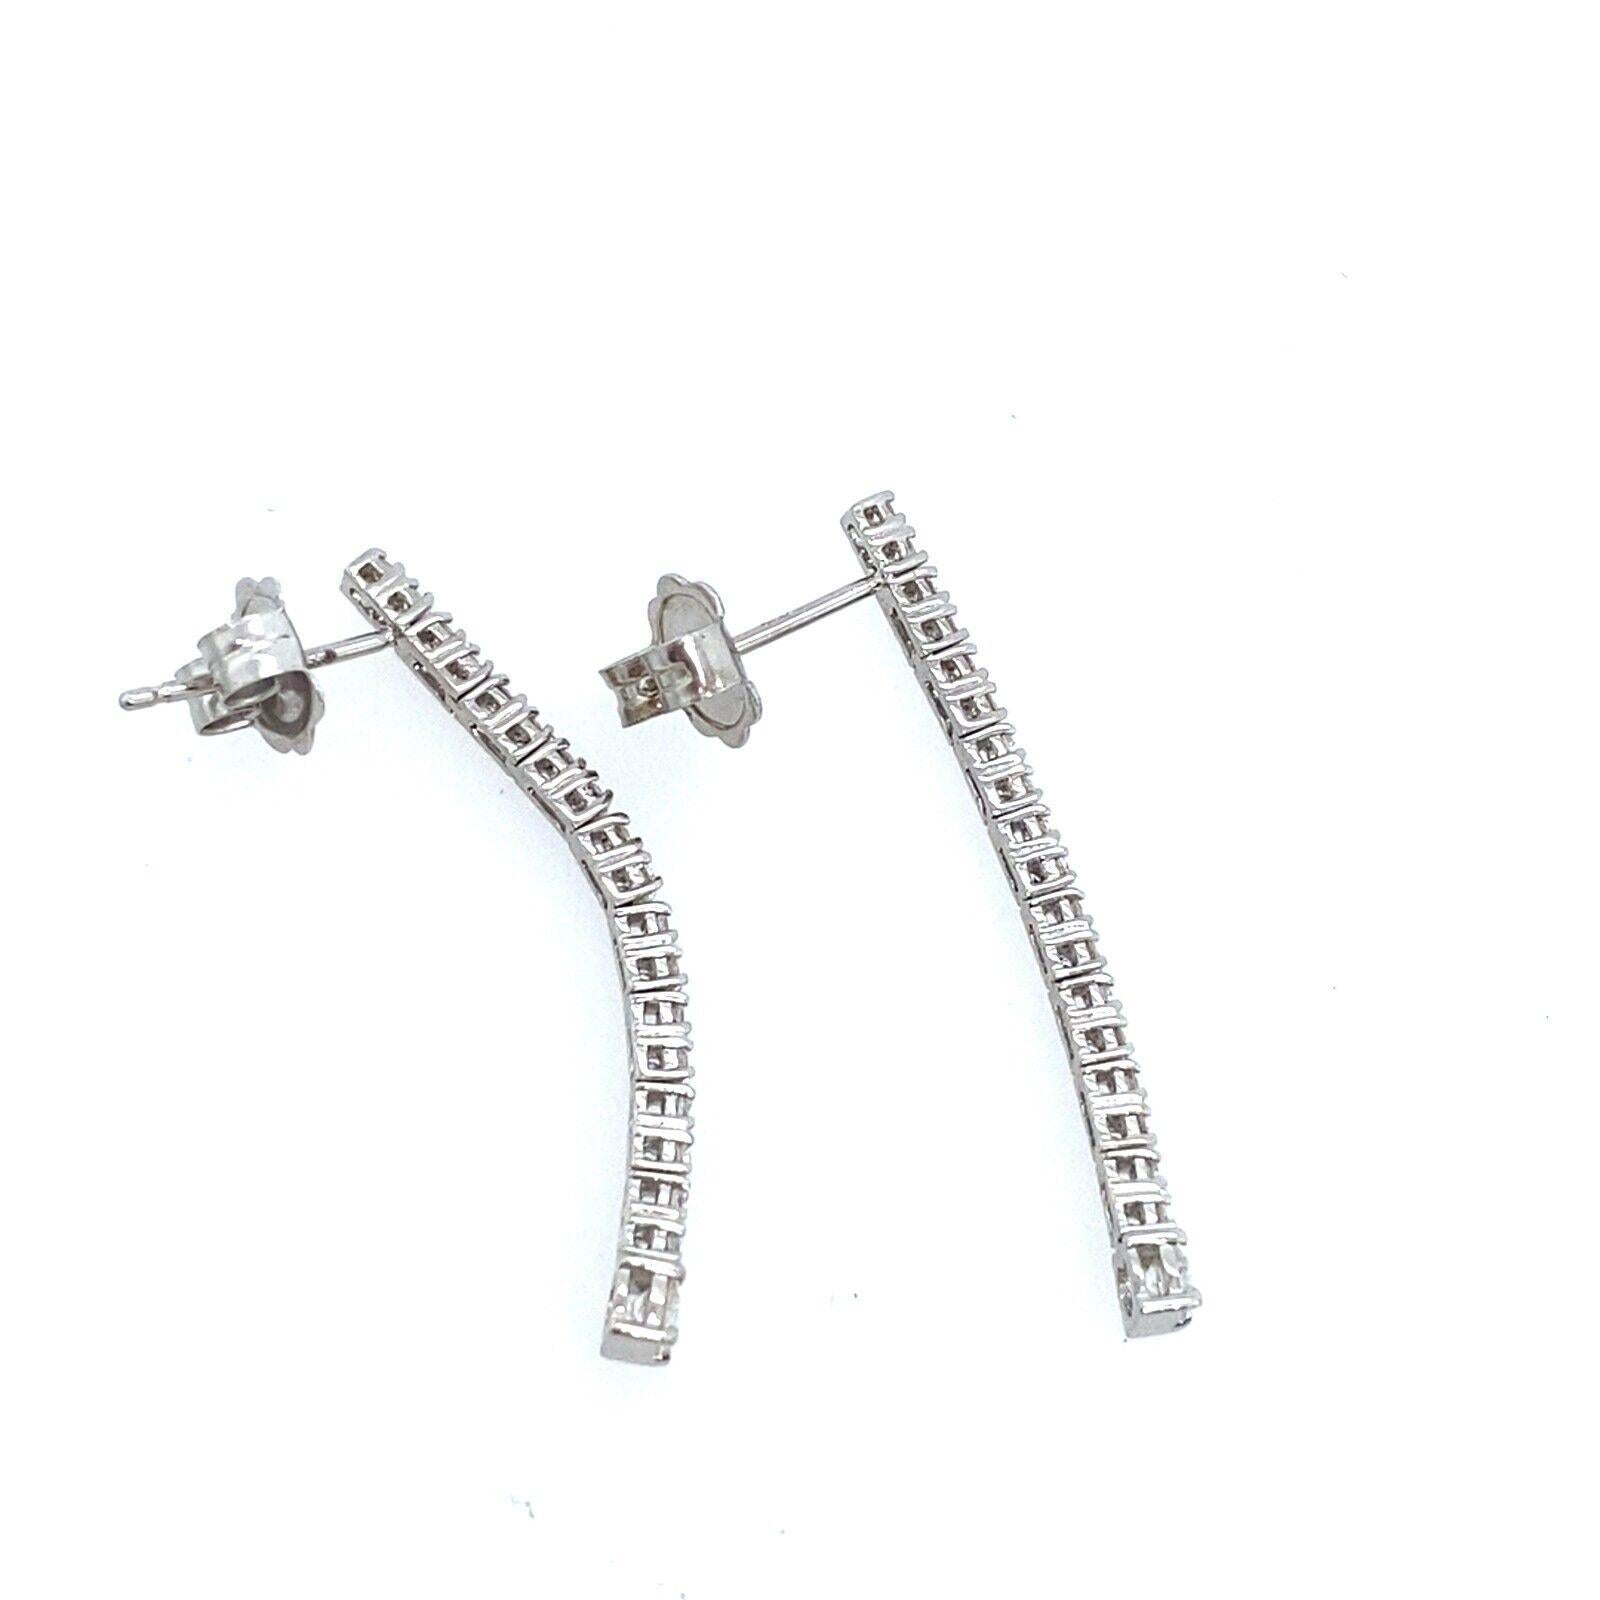 These timeless and elegant diamond tennis earrings are crafted to perfection. 
Made from 18ct White Gold, the earrings feature a total of 0.56ct of Diamonds. The luxurious earrings are designed to be worn during any occasion.

Additional